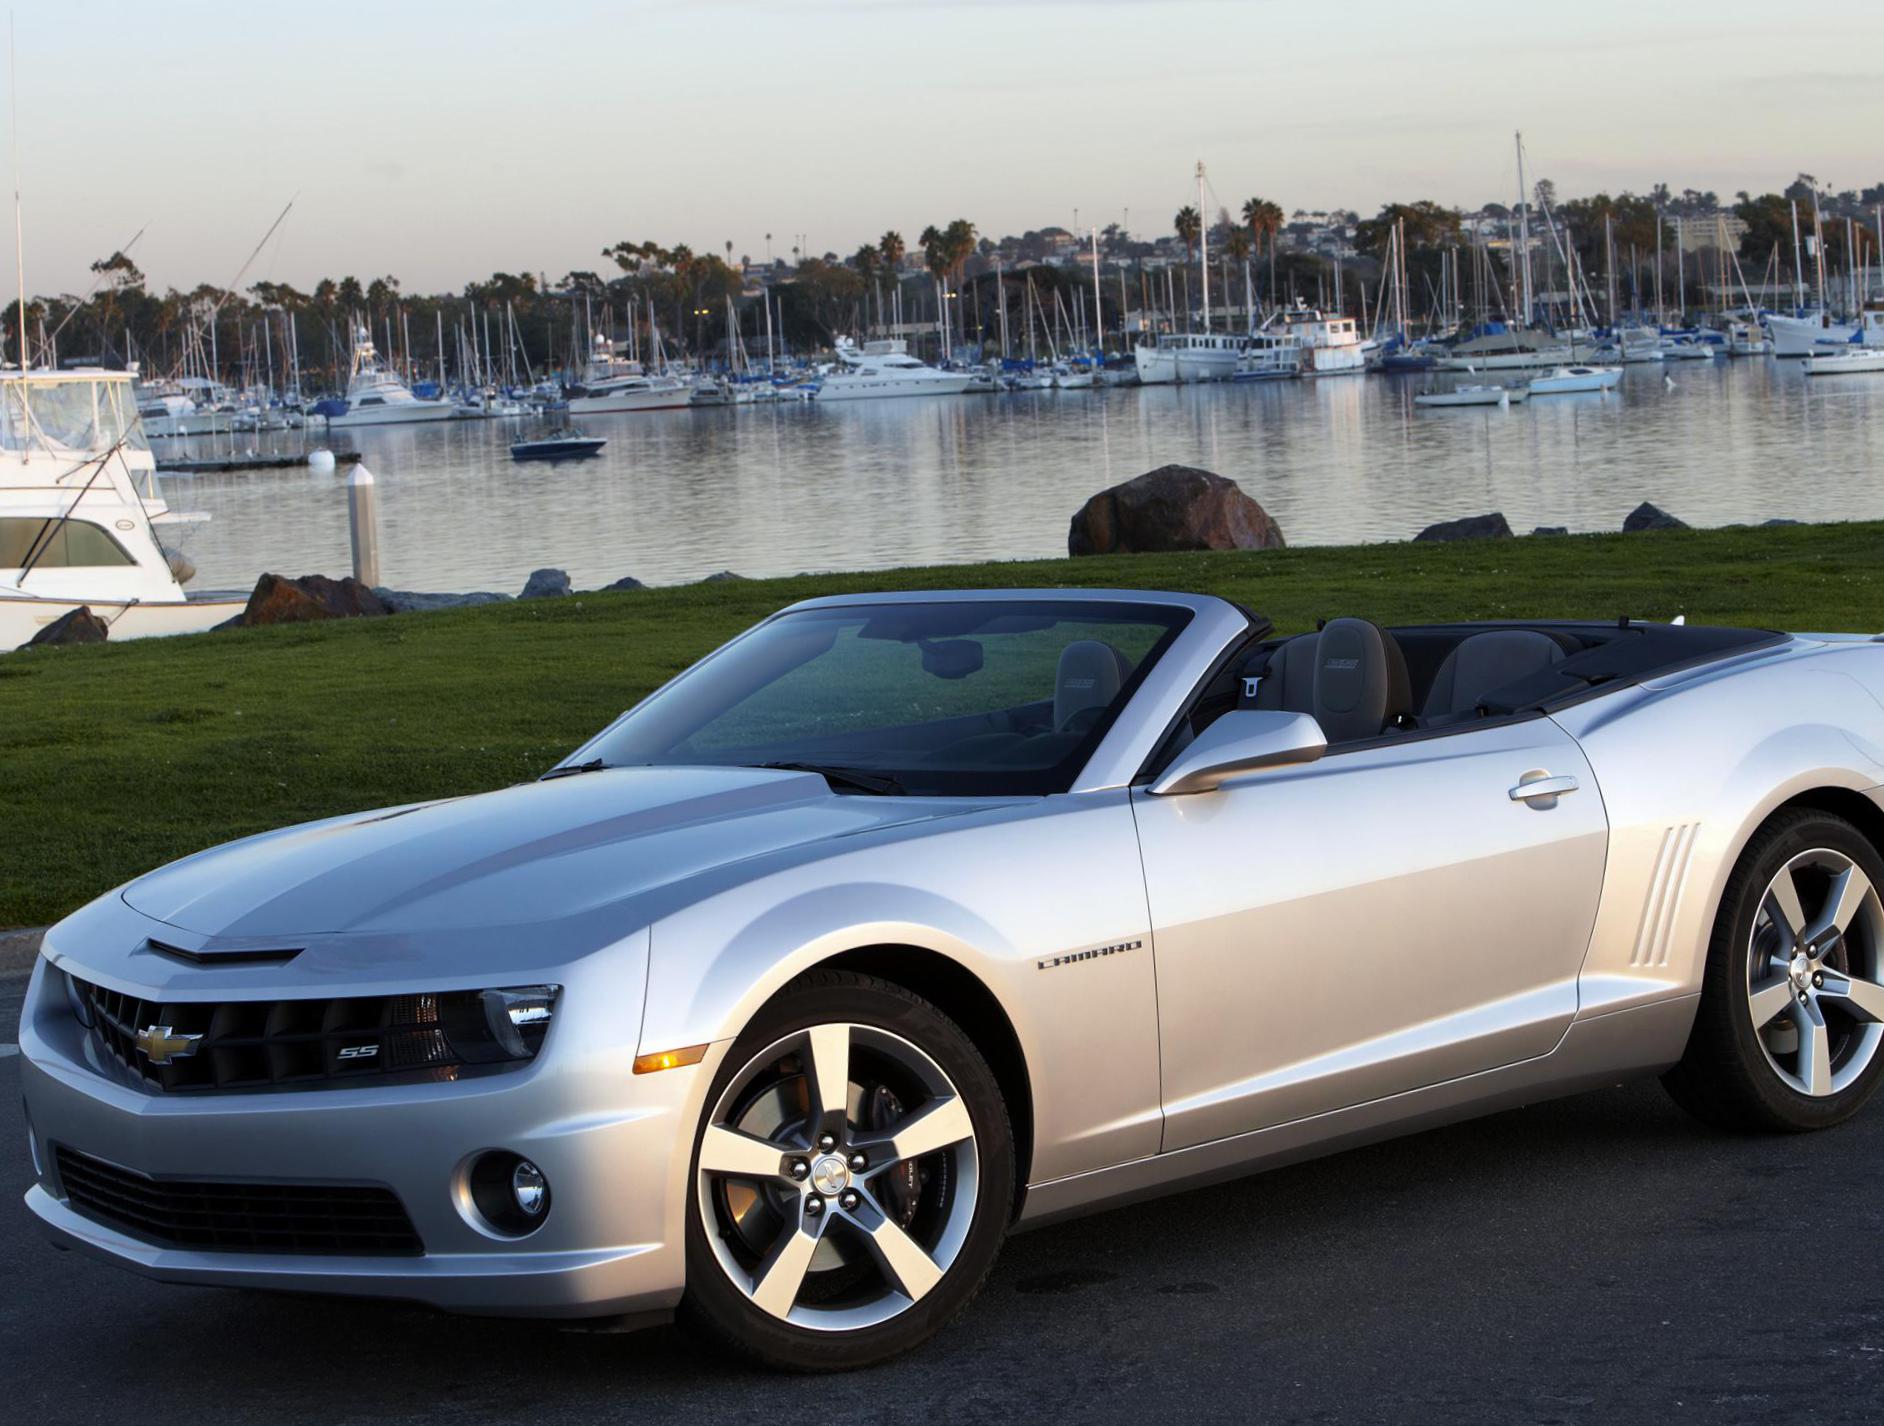 Camaro Convertible Chevrolet approved 2008